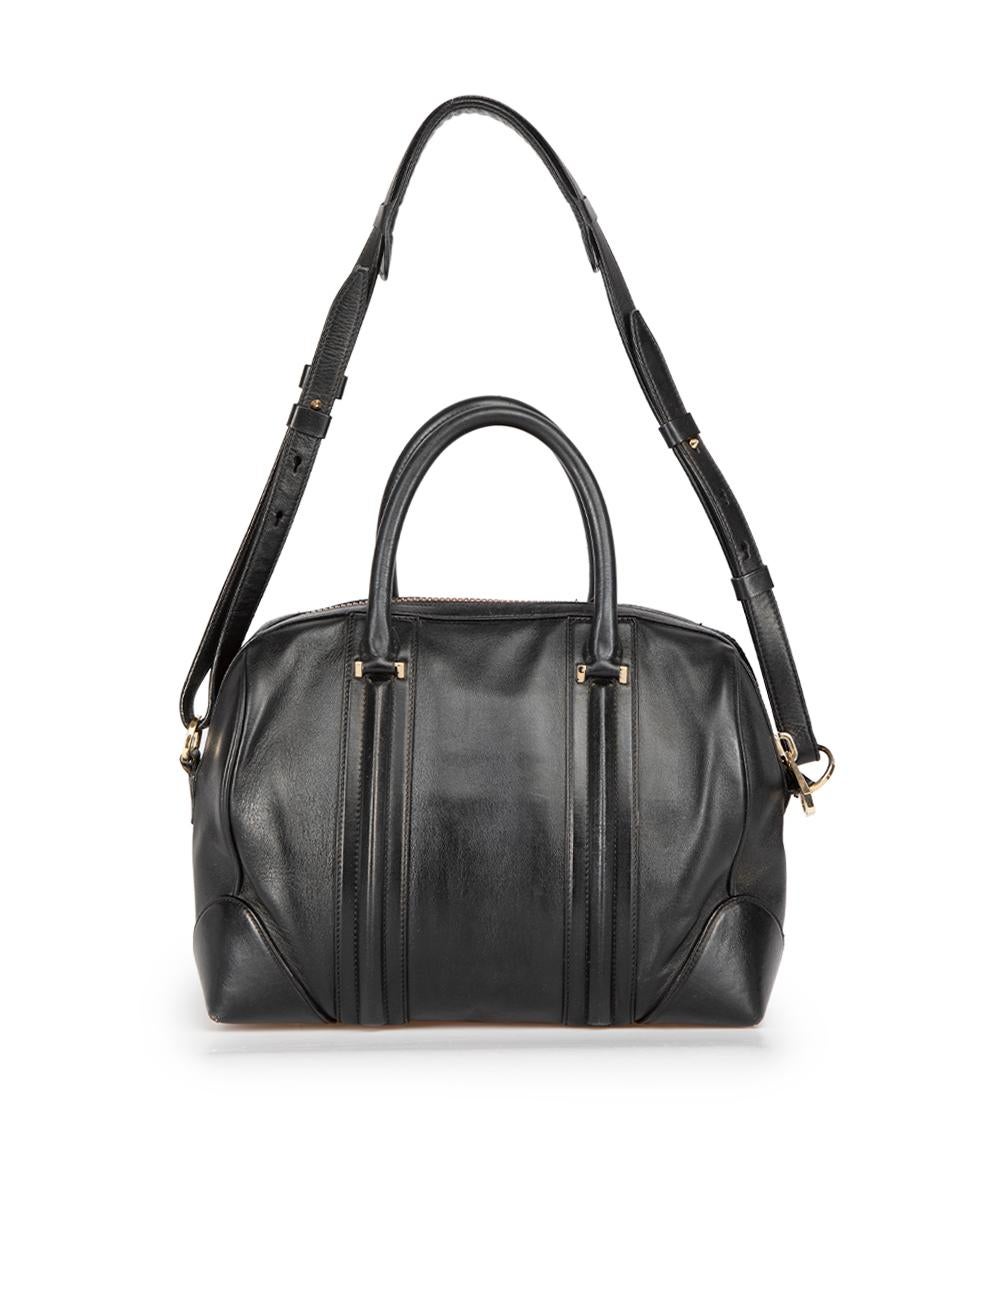 Givenchy Black Leather Small Antigona Handbag In Good Condition For Sale In London, GB